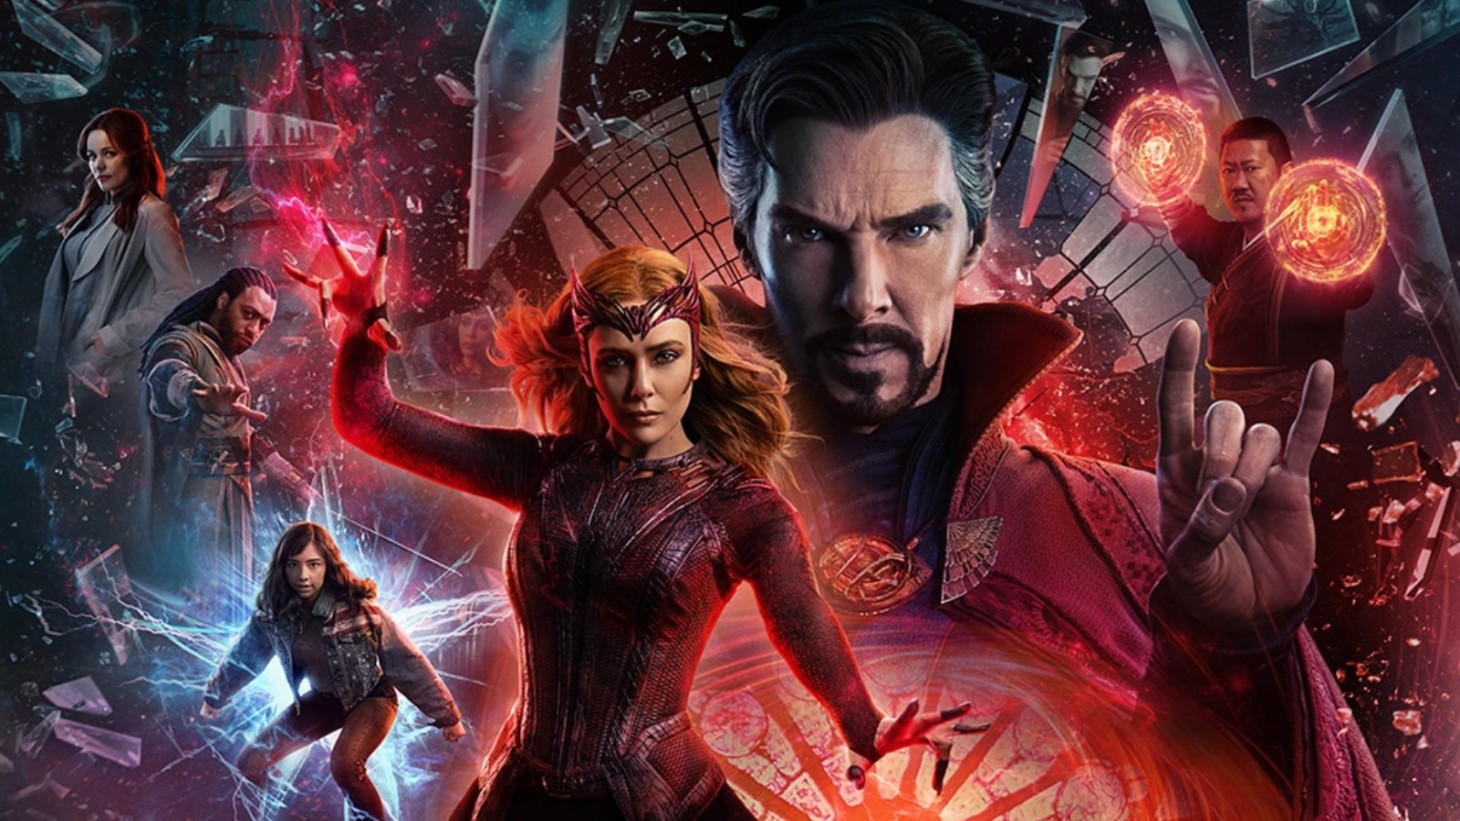 How Doctor Strange In The Multiverse Of Madness Sets Up What’s Next For The MCU